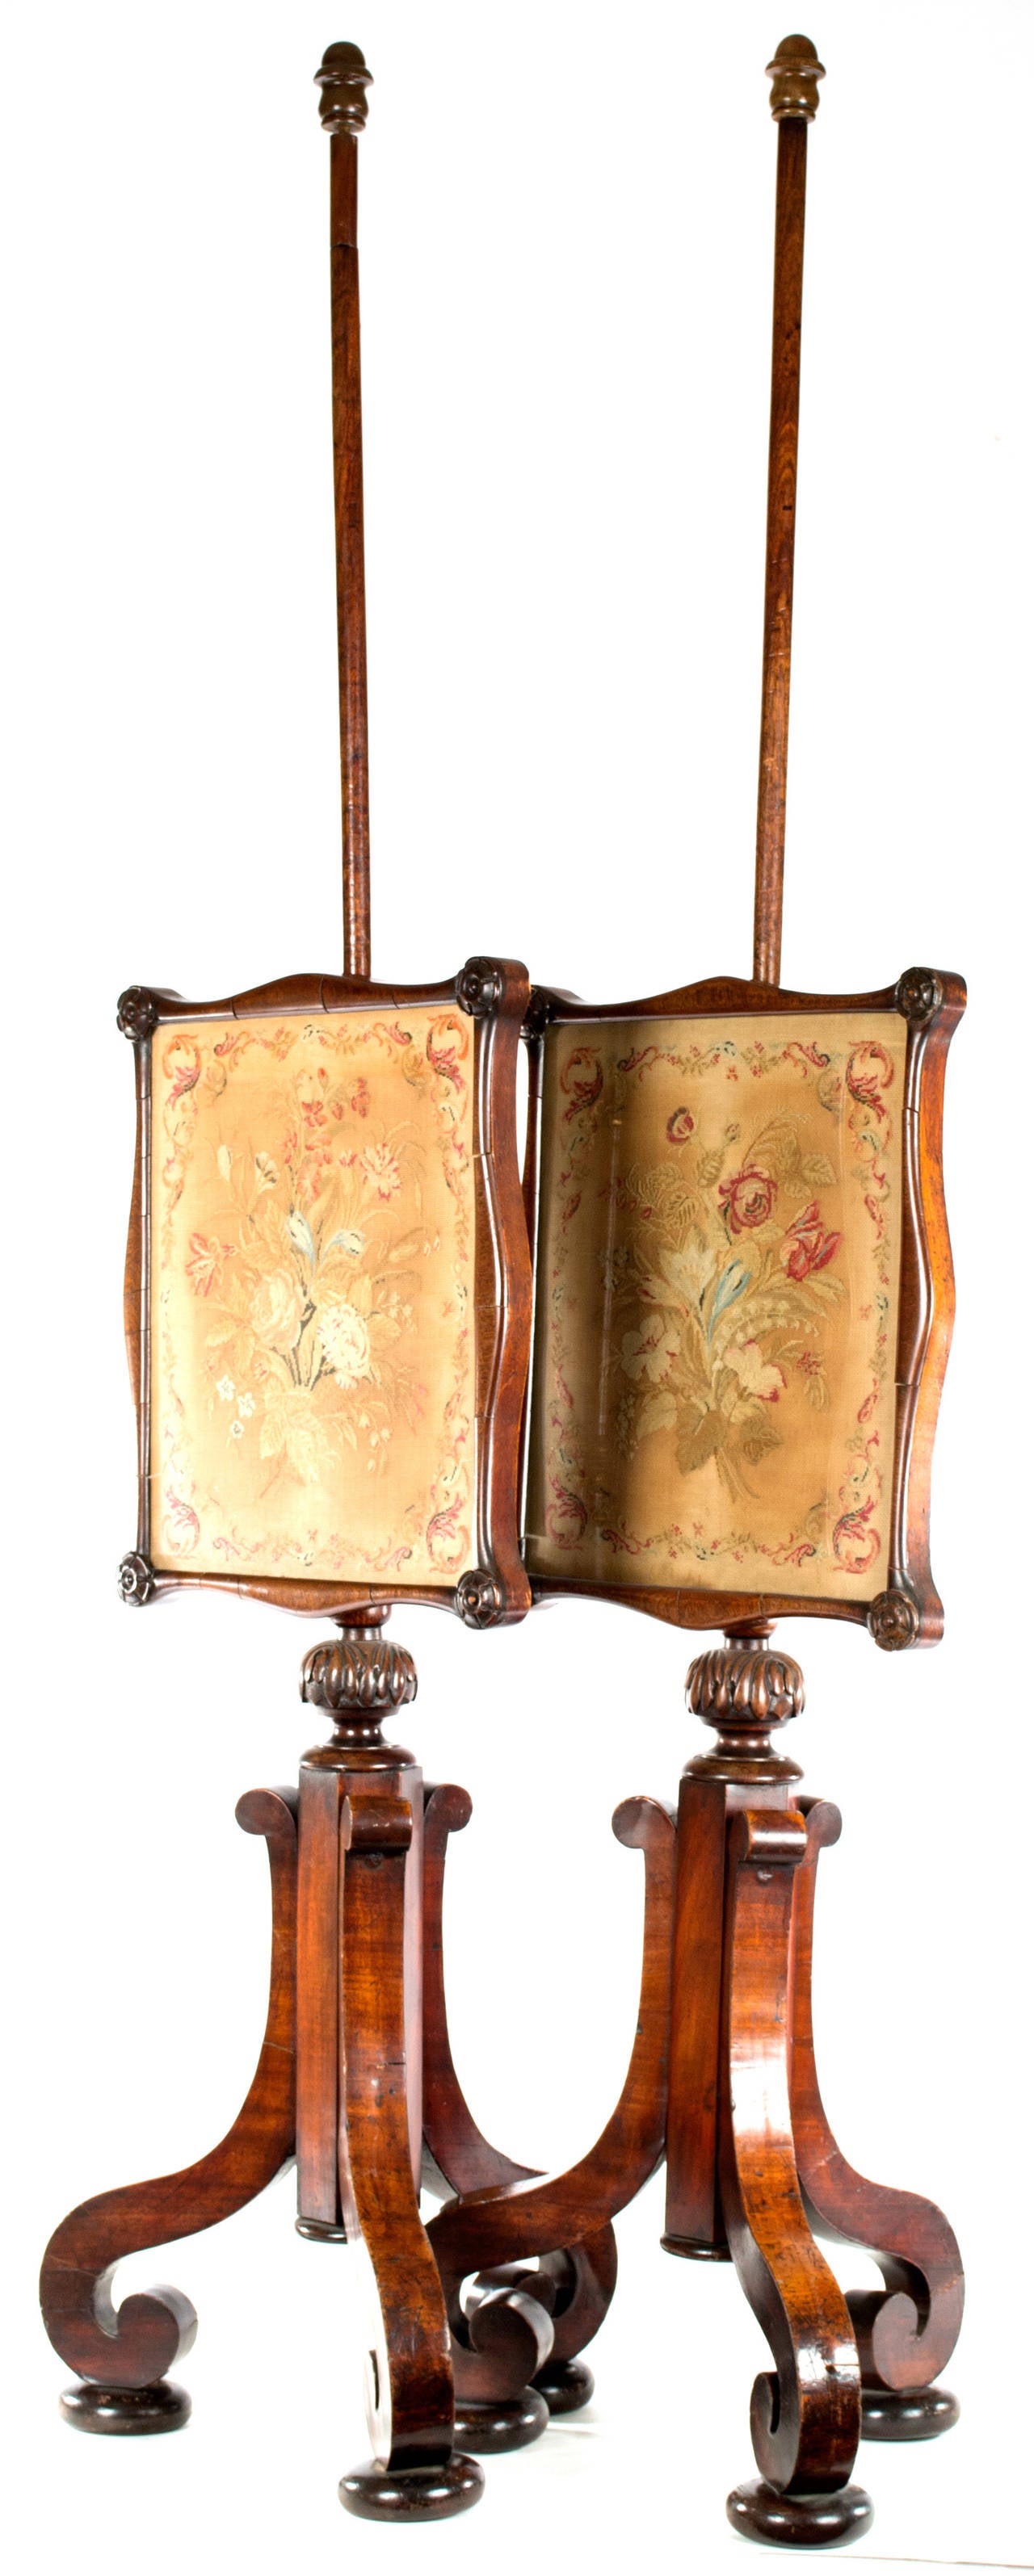 19th Century Pair of English Embroidered Mahogany Fire Screens For Sale